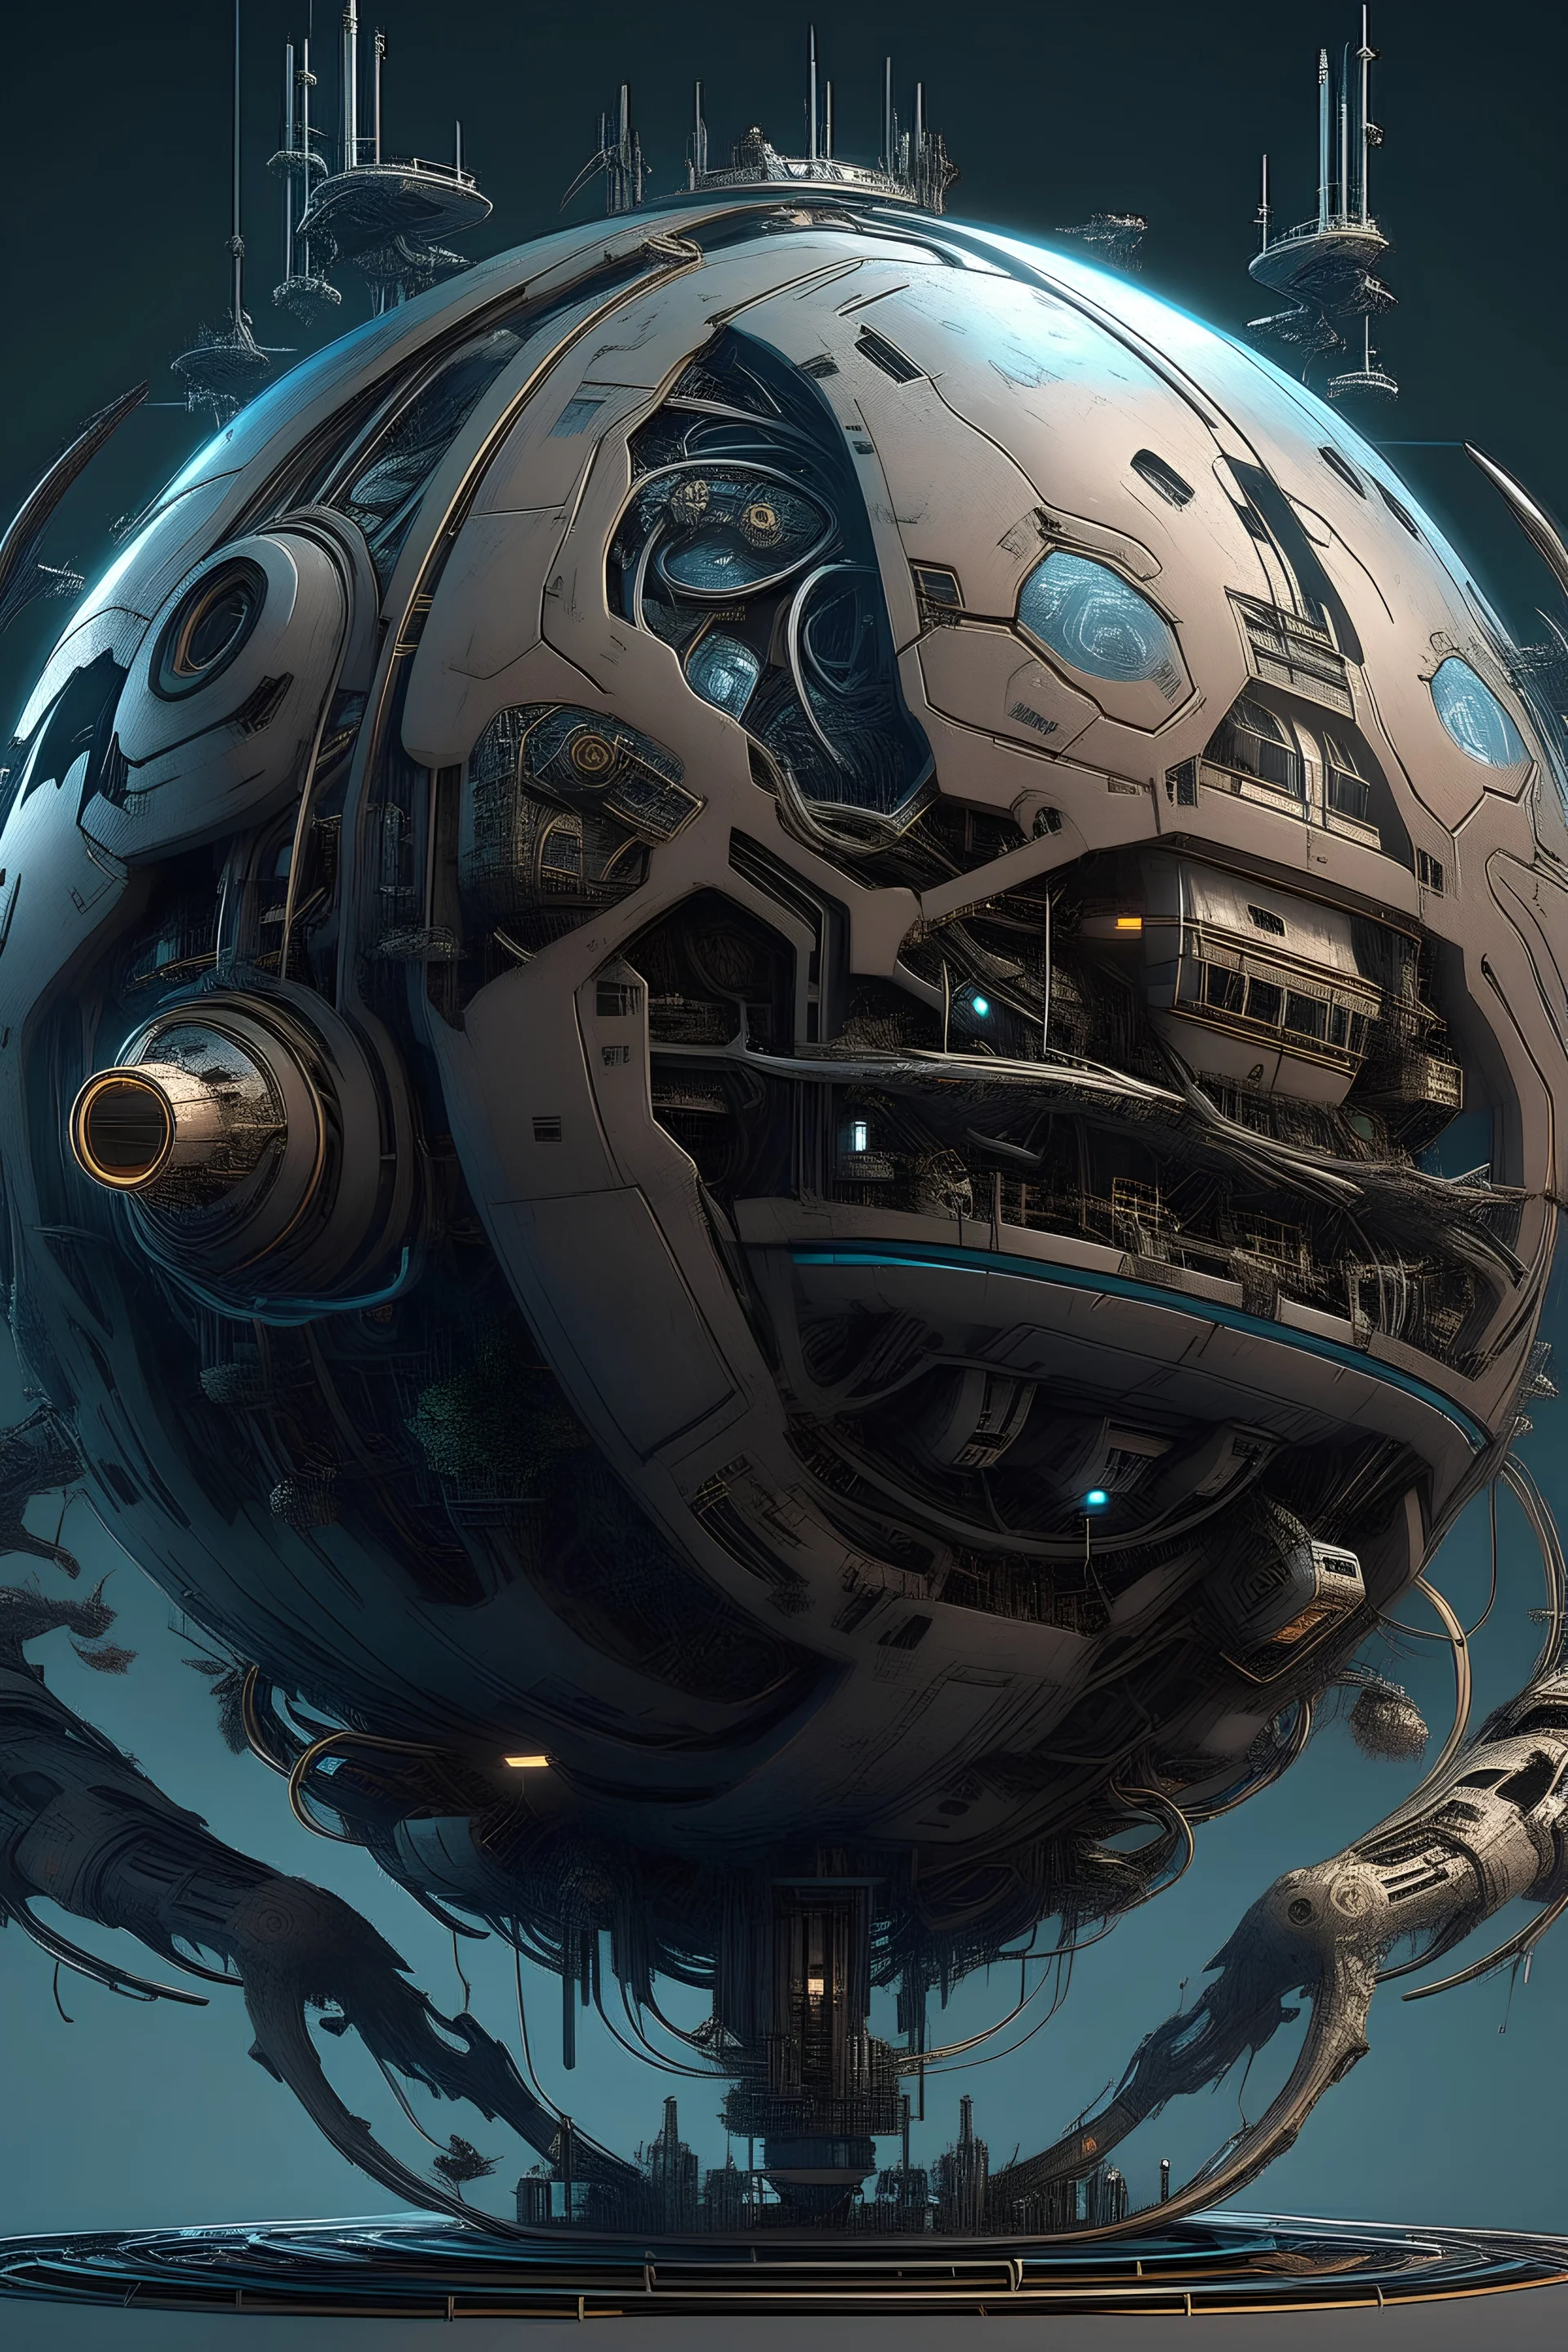 spherical spaceship with lot of limbs that surround a scifi character